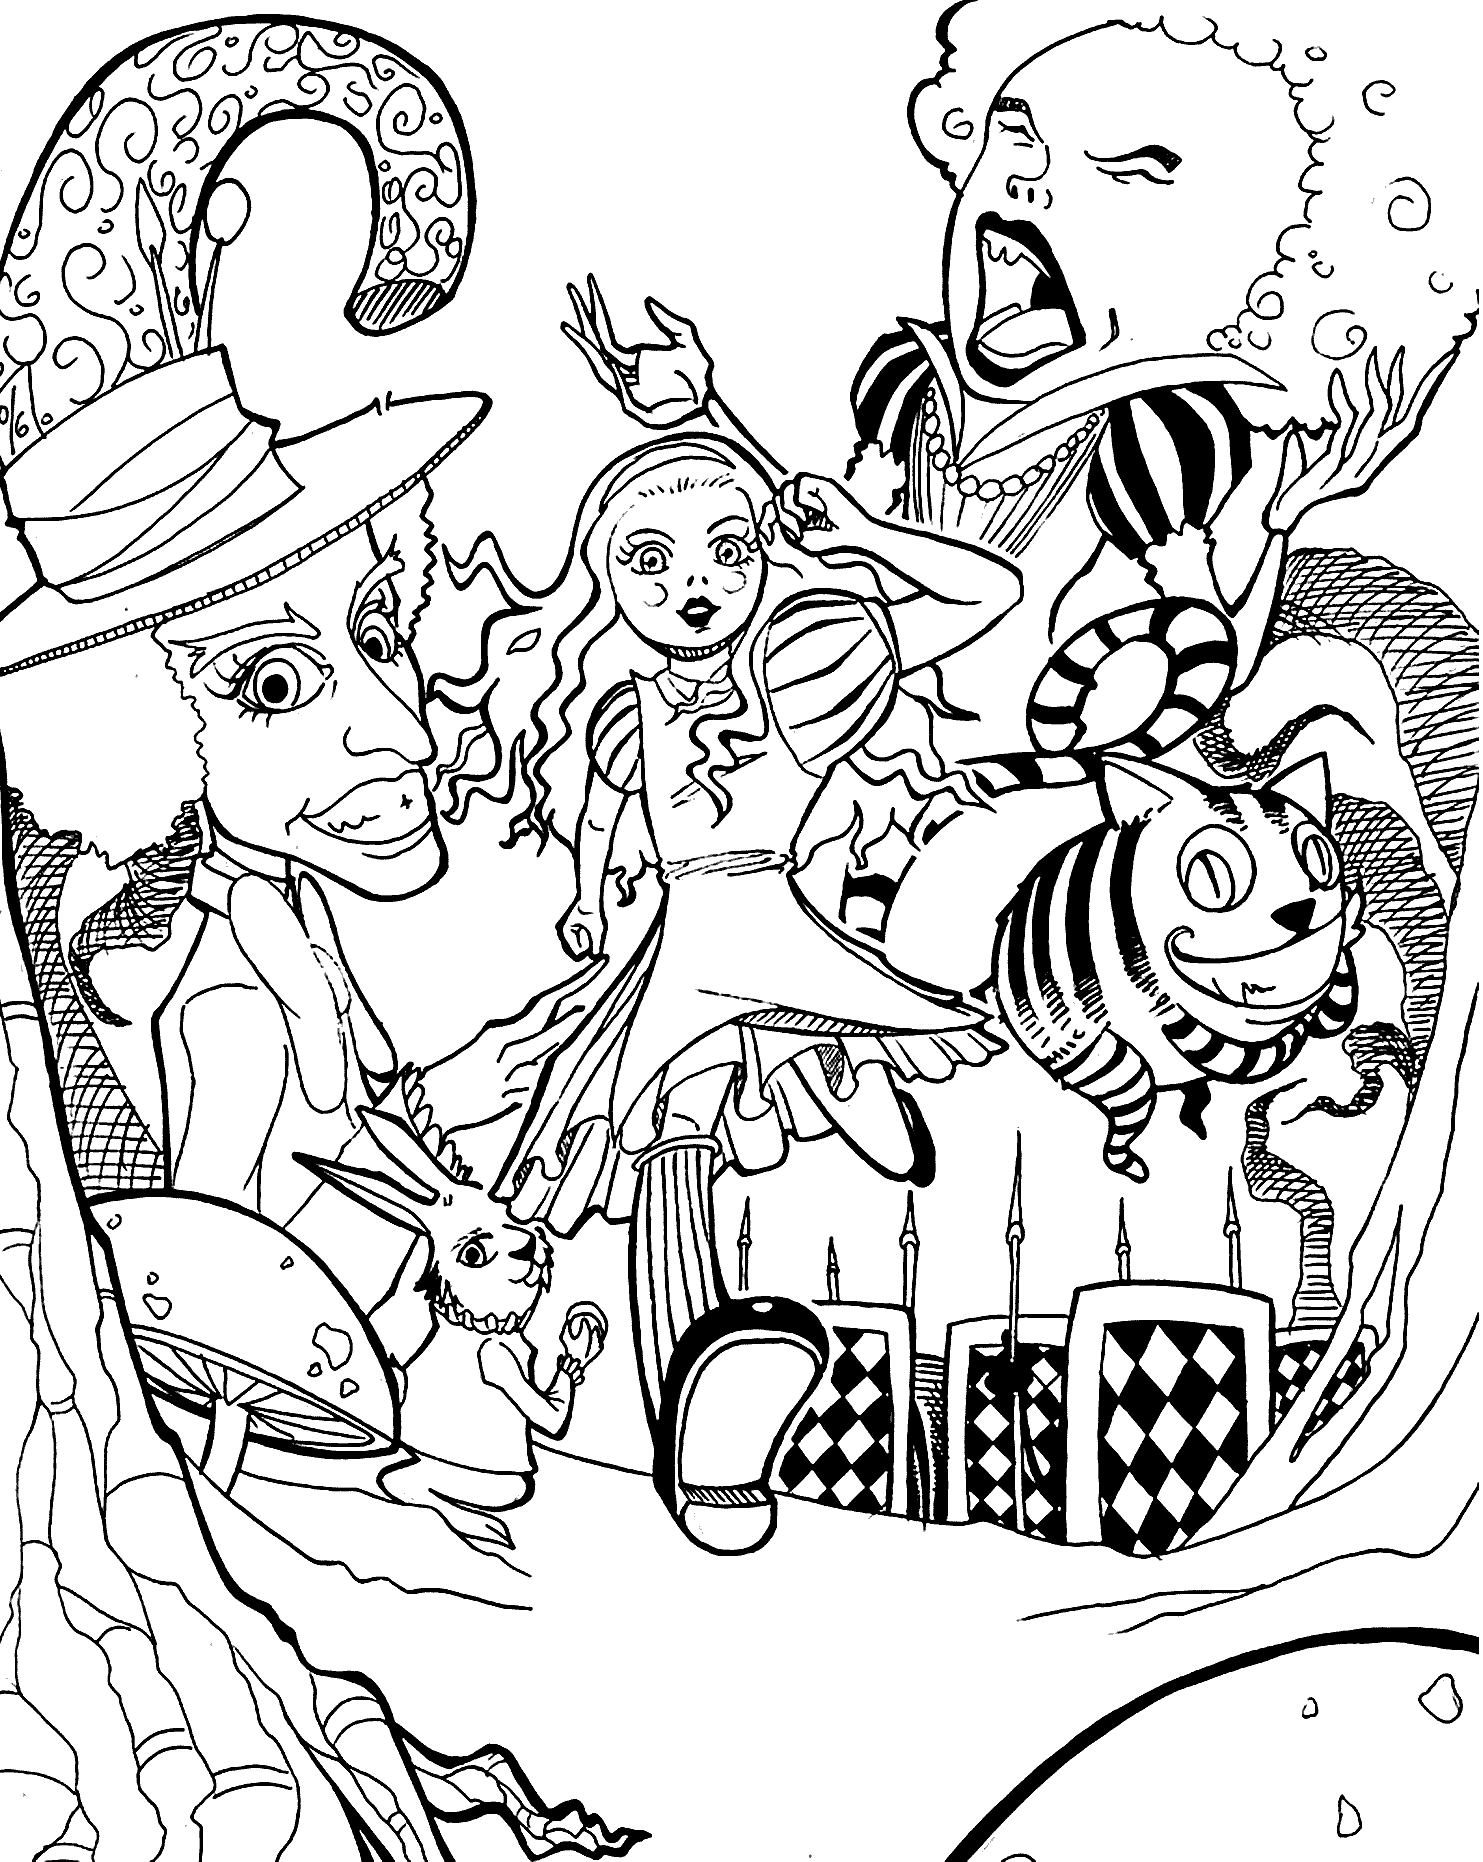 Alice In Wonderland Coloring Pages Free Printables - Coloring ...